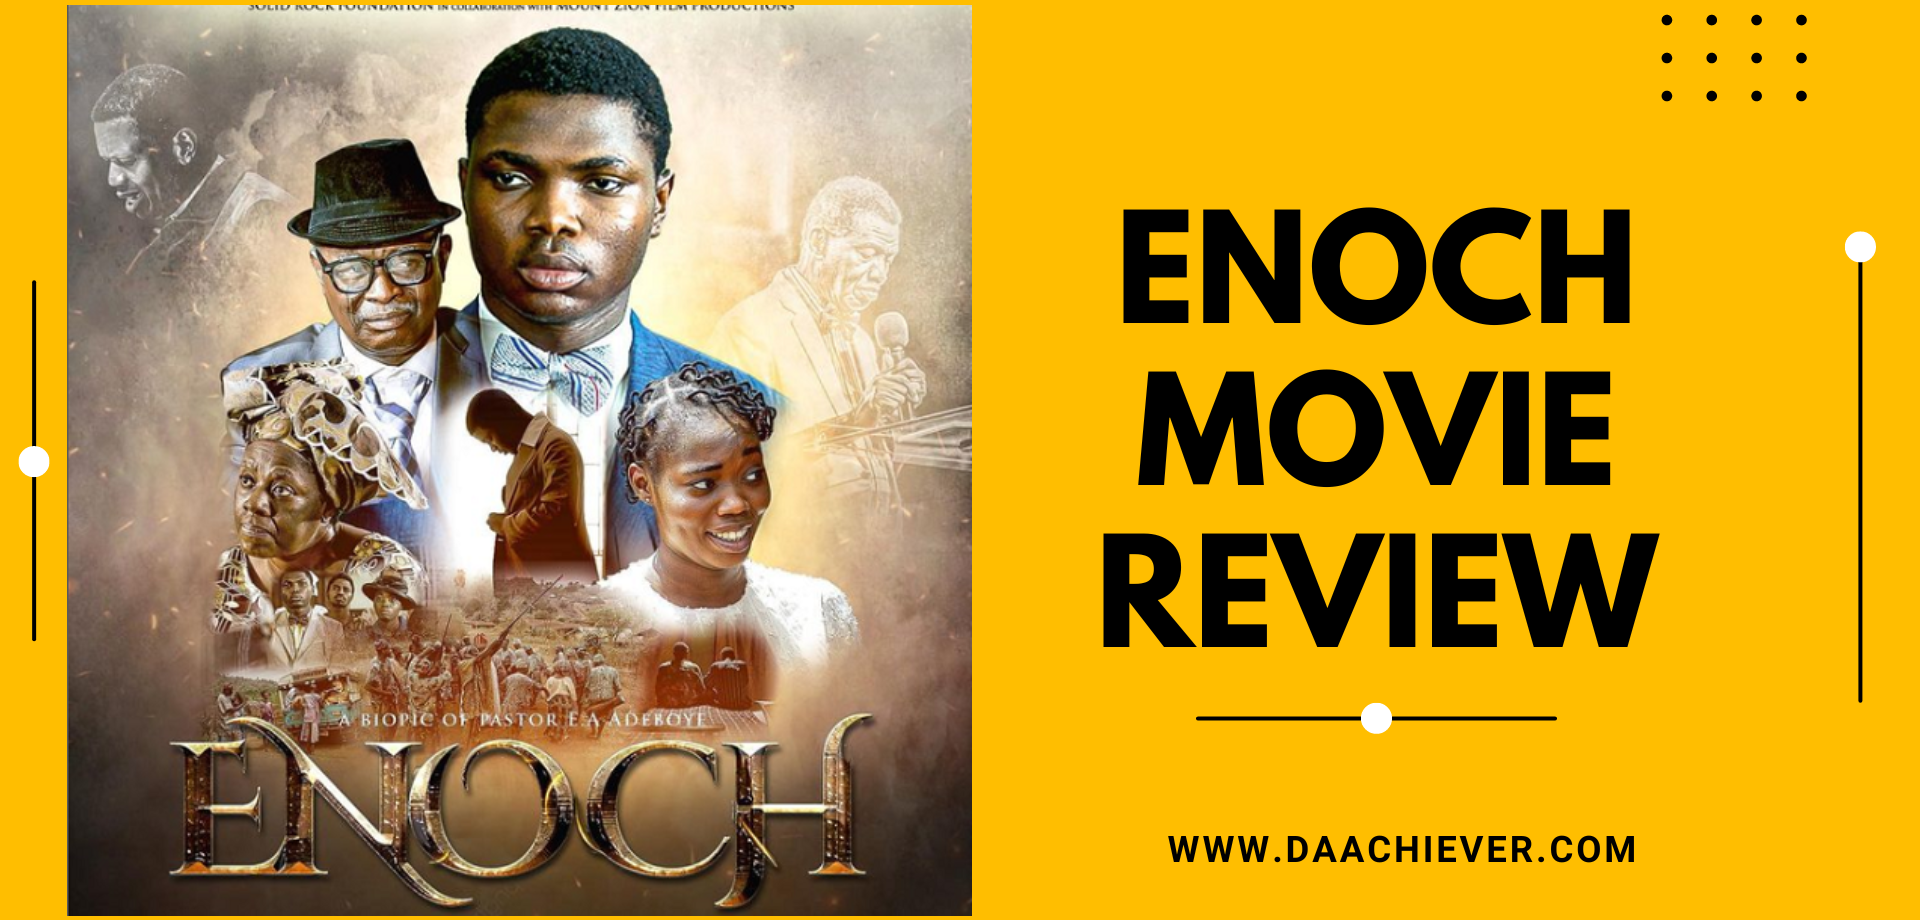 Enoch Movie Review: A Mount Zion Film Production